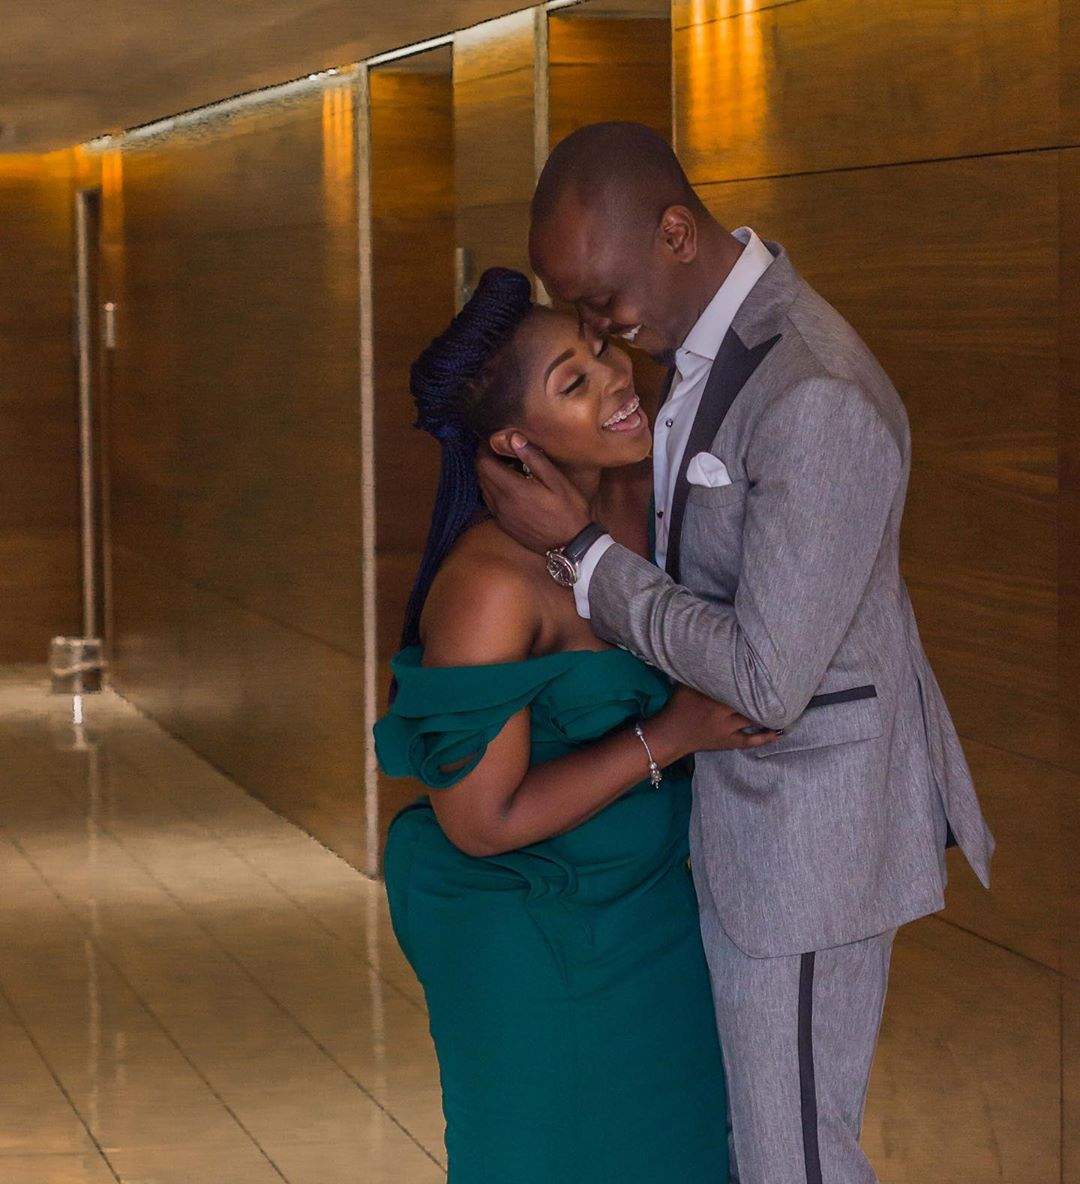 'There is no woman in the world I would trade you with' - IK Osakioduwa tells wife on their 11th wedding anniversary